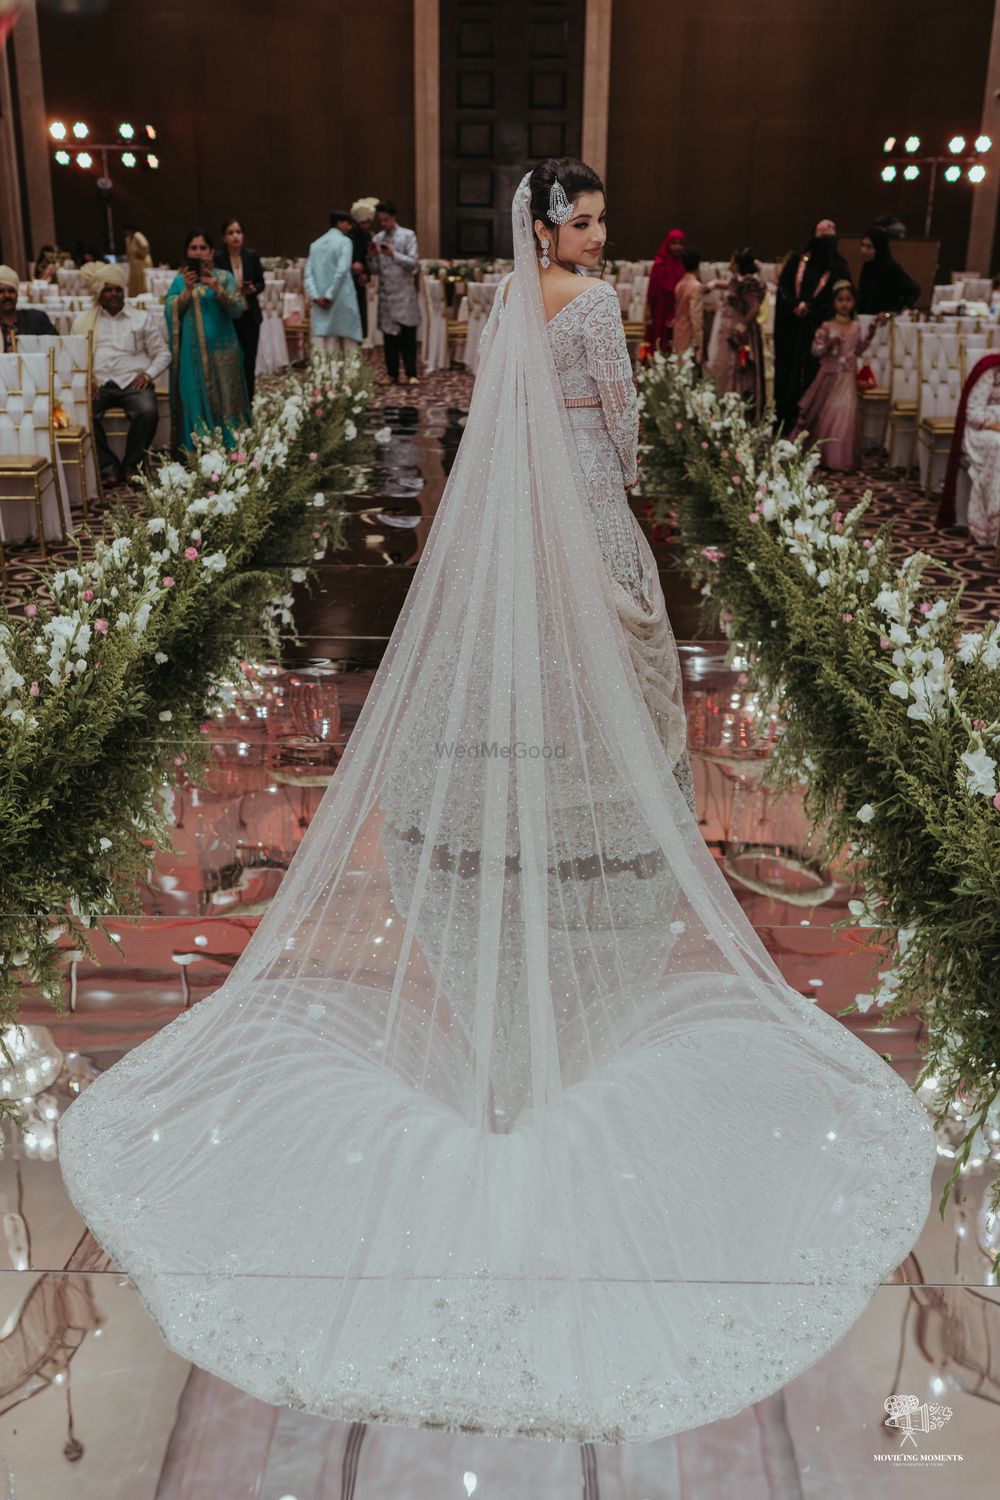 Photo of bride entering her wedding in a white bridal lehenga with a train